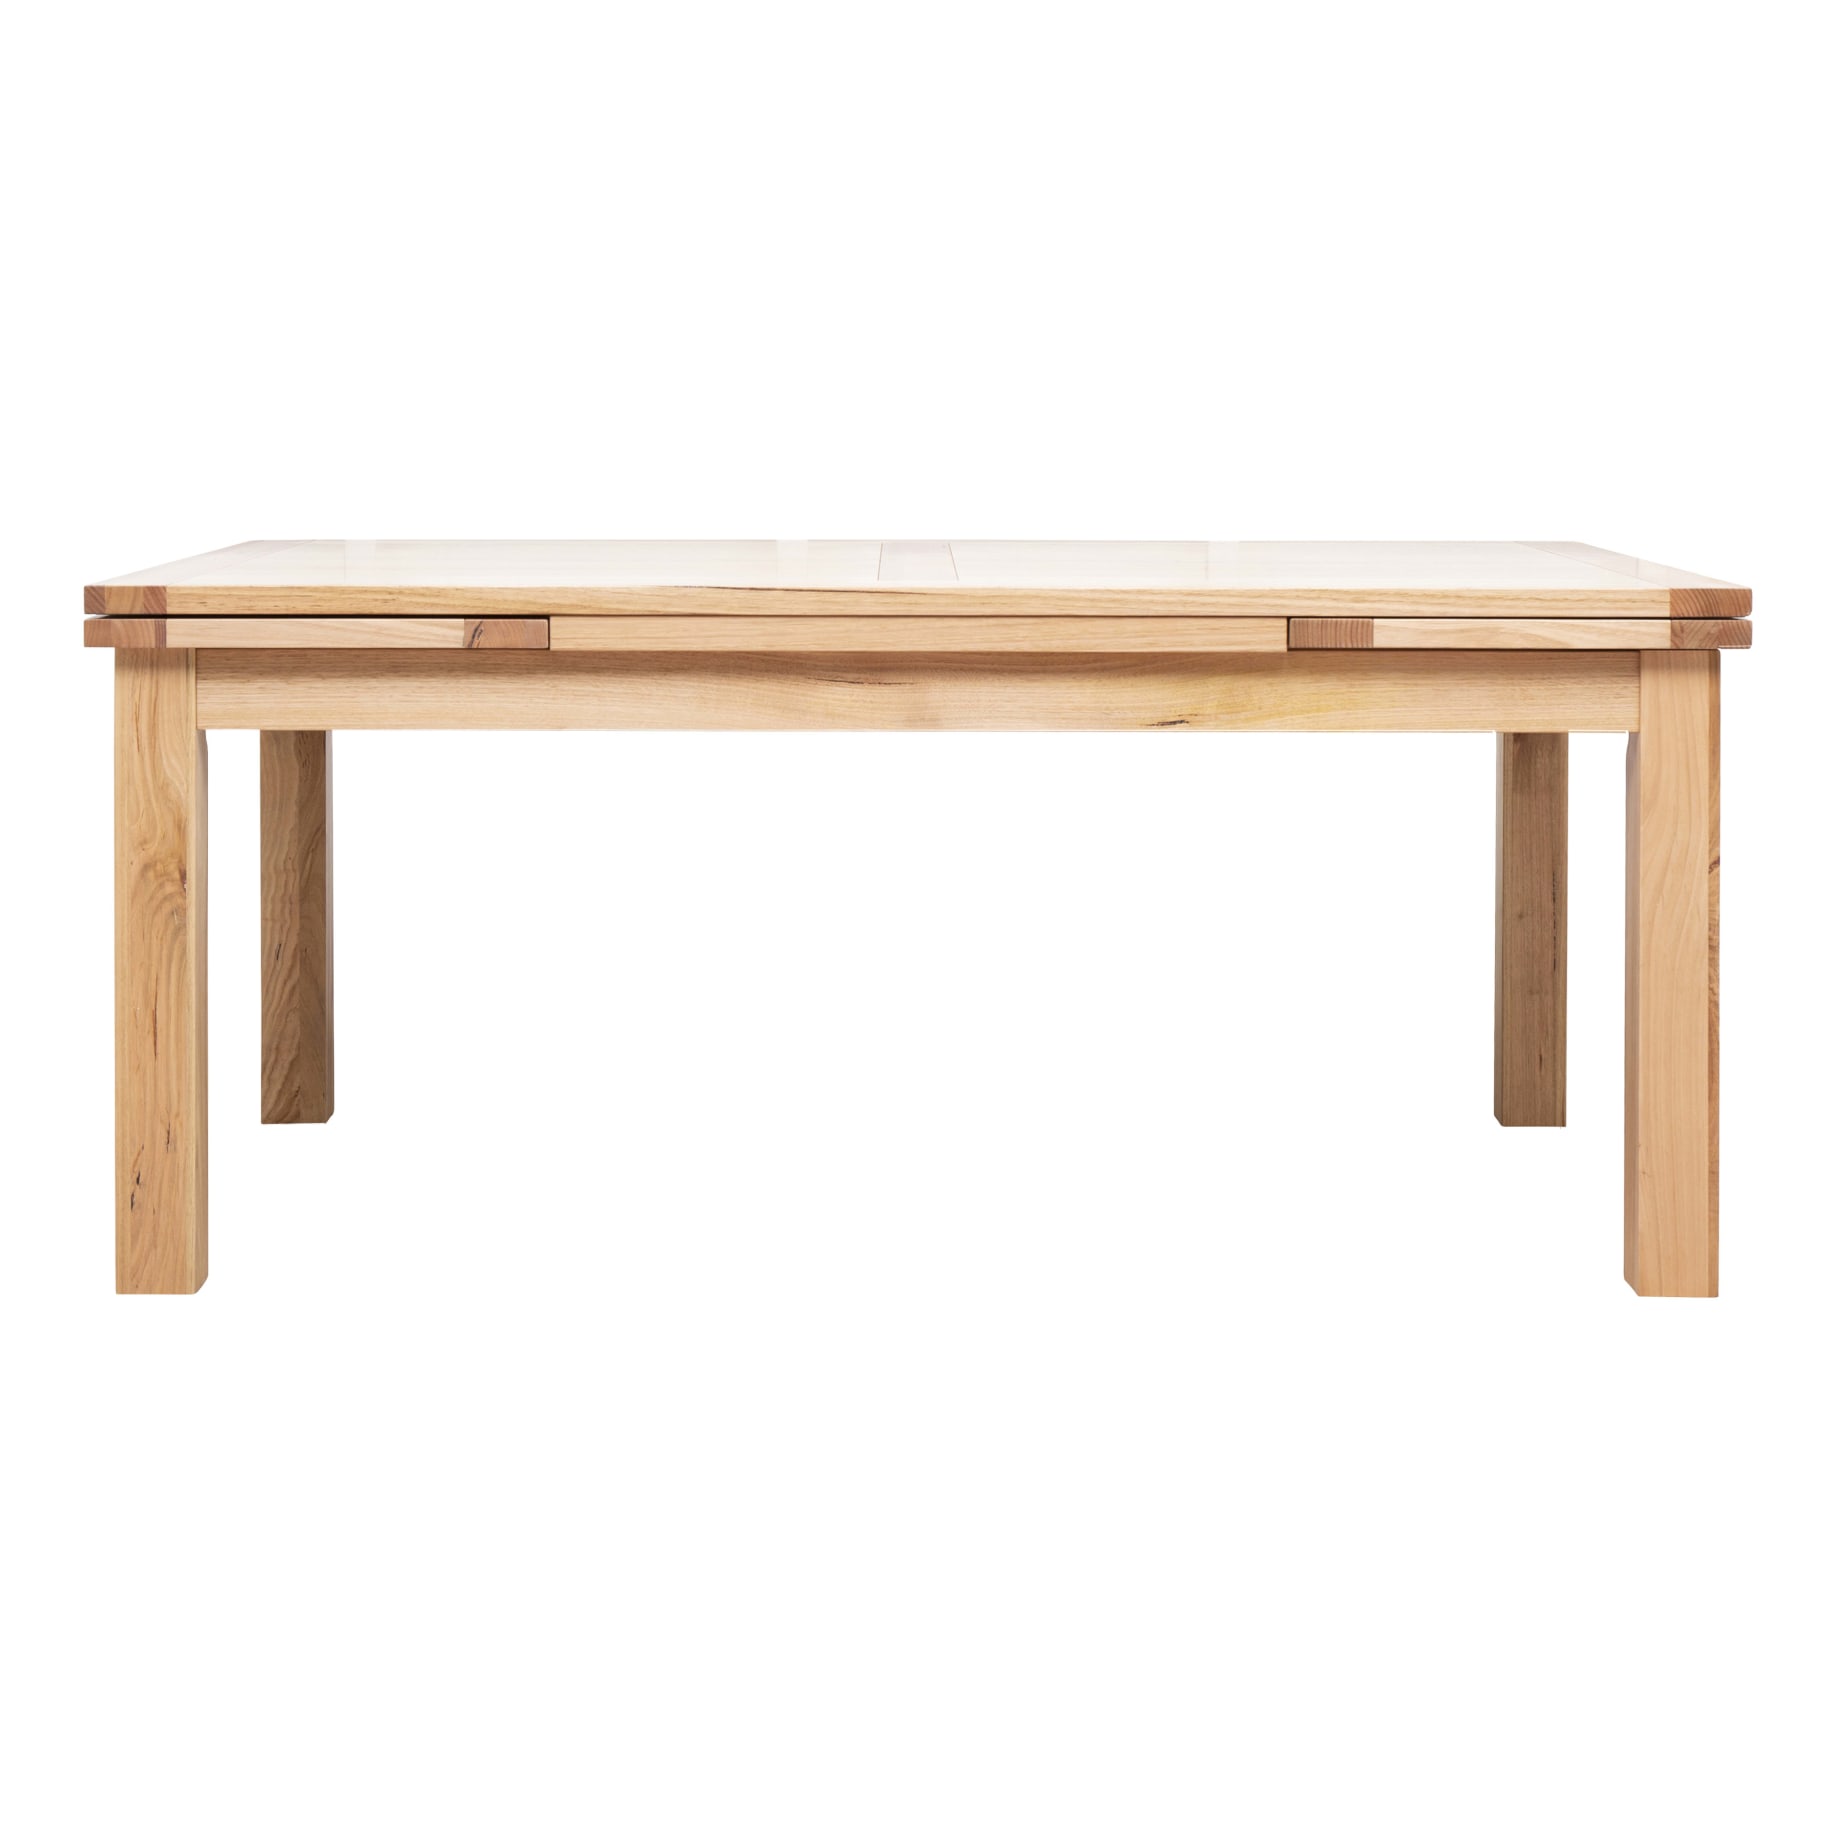 Derwent Ext. Dining Table 180-280cm in Messmate